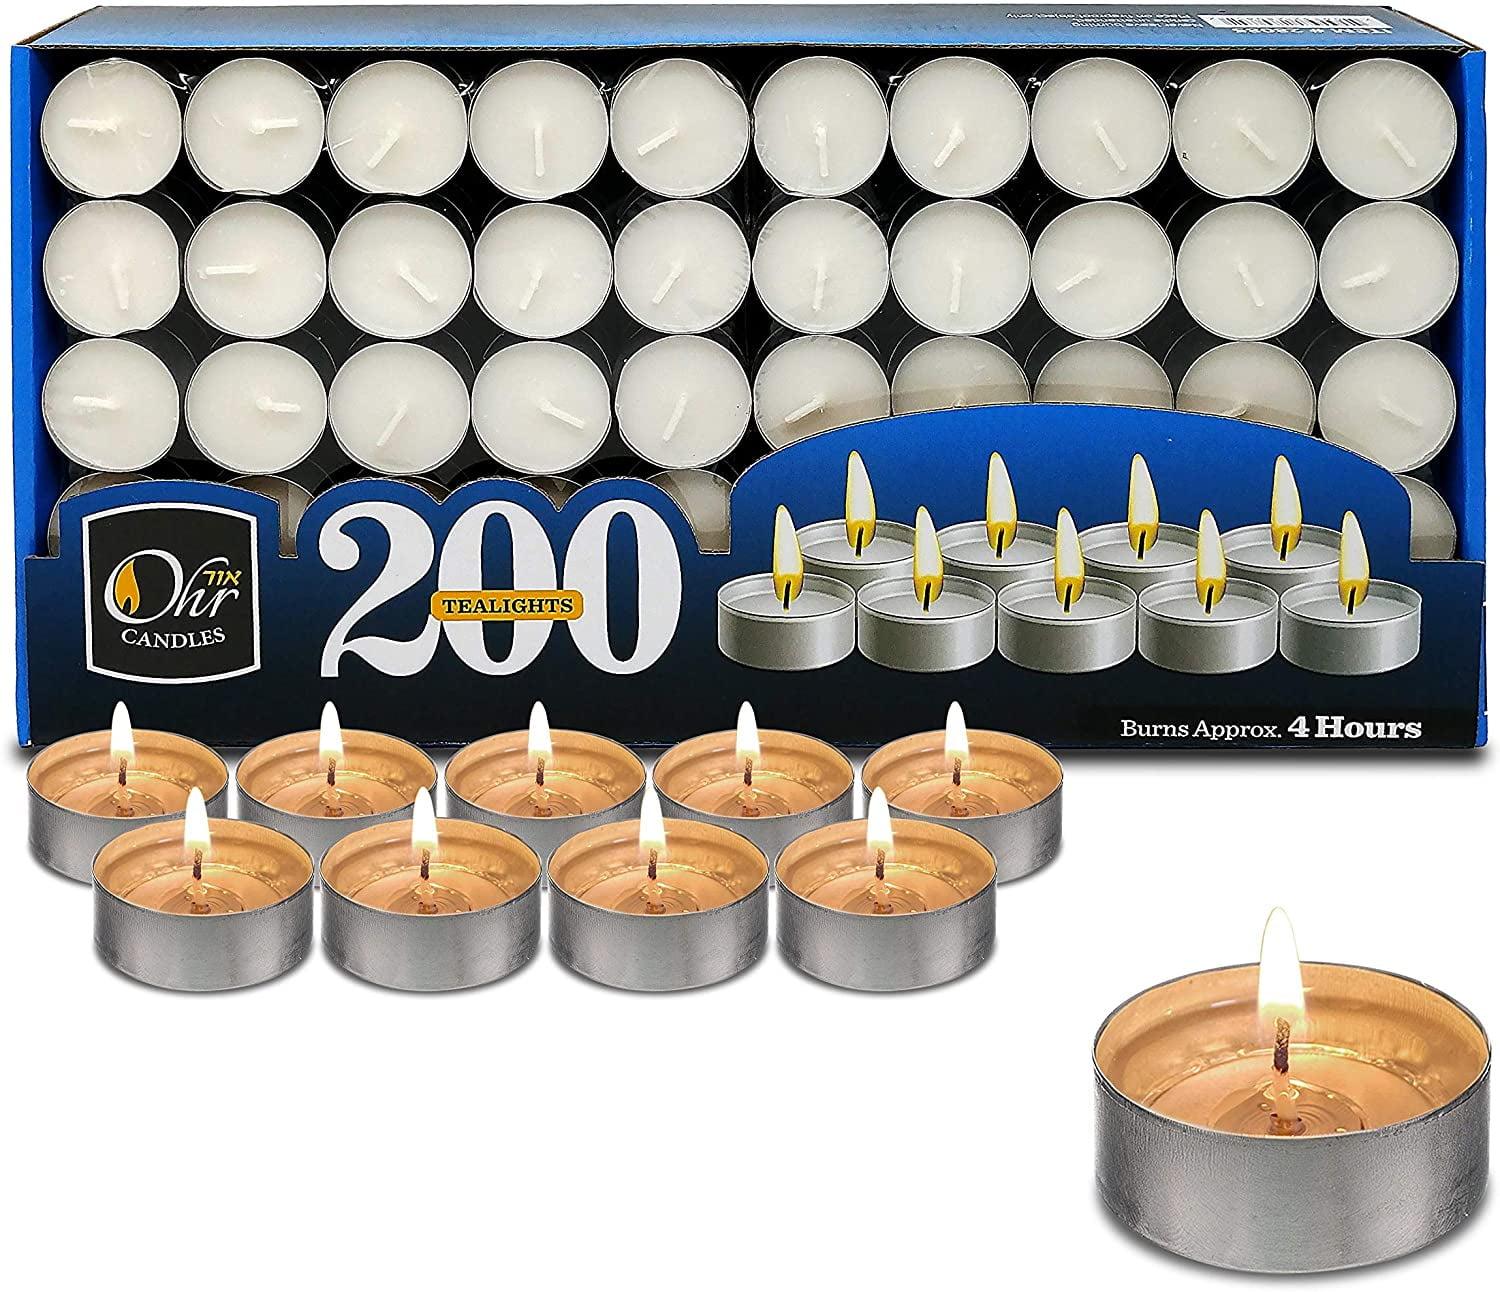 Ohr Tea Light Candles - 50 Bulk Pack - White Unscented Travel, Centerpiece, Decorative Candle - 4 Hour Burn Time